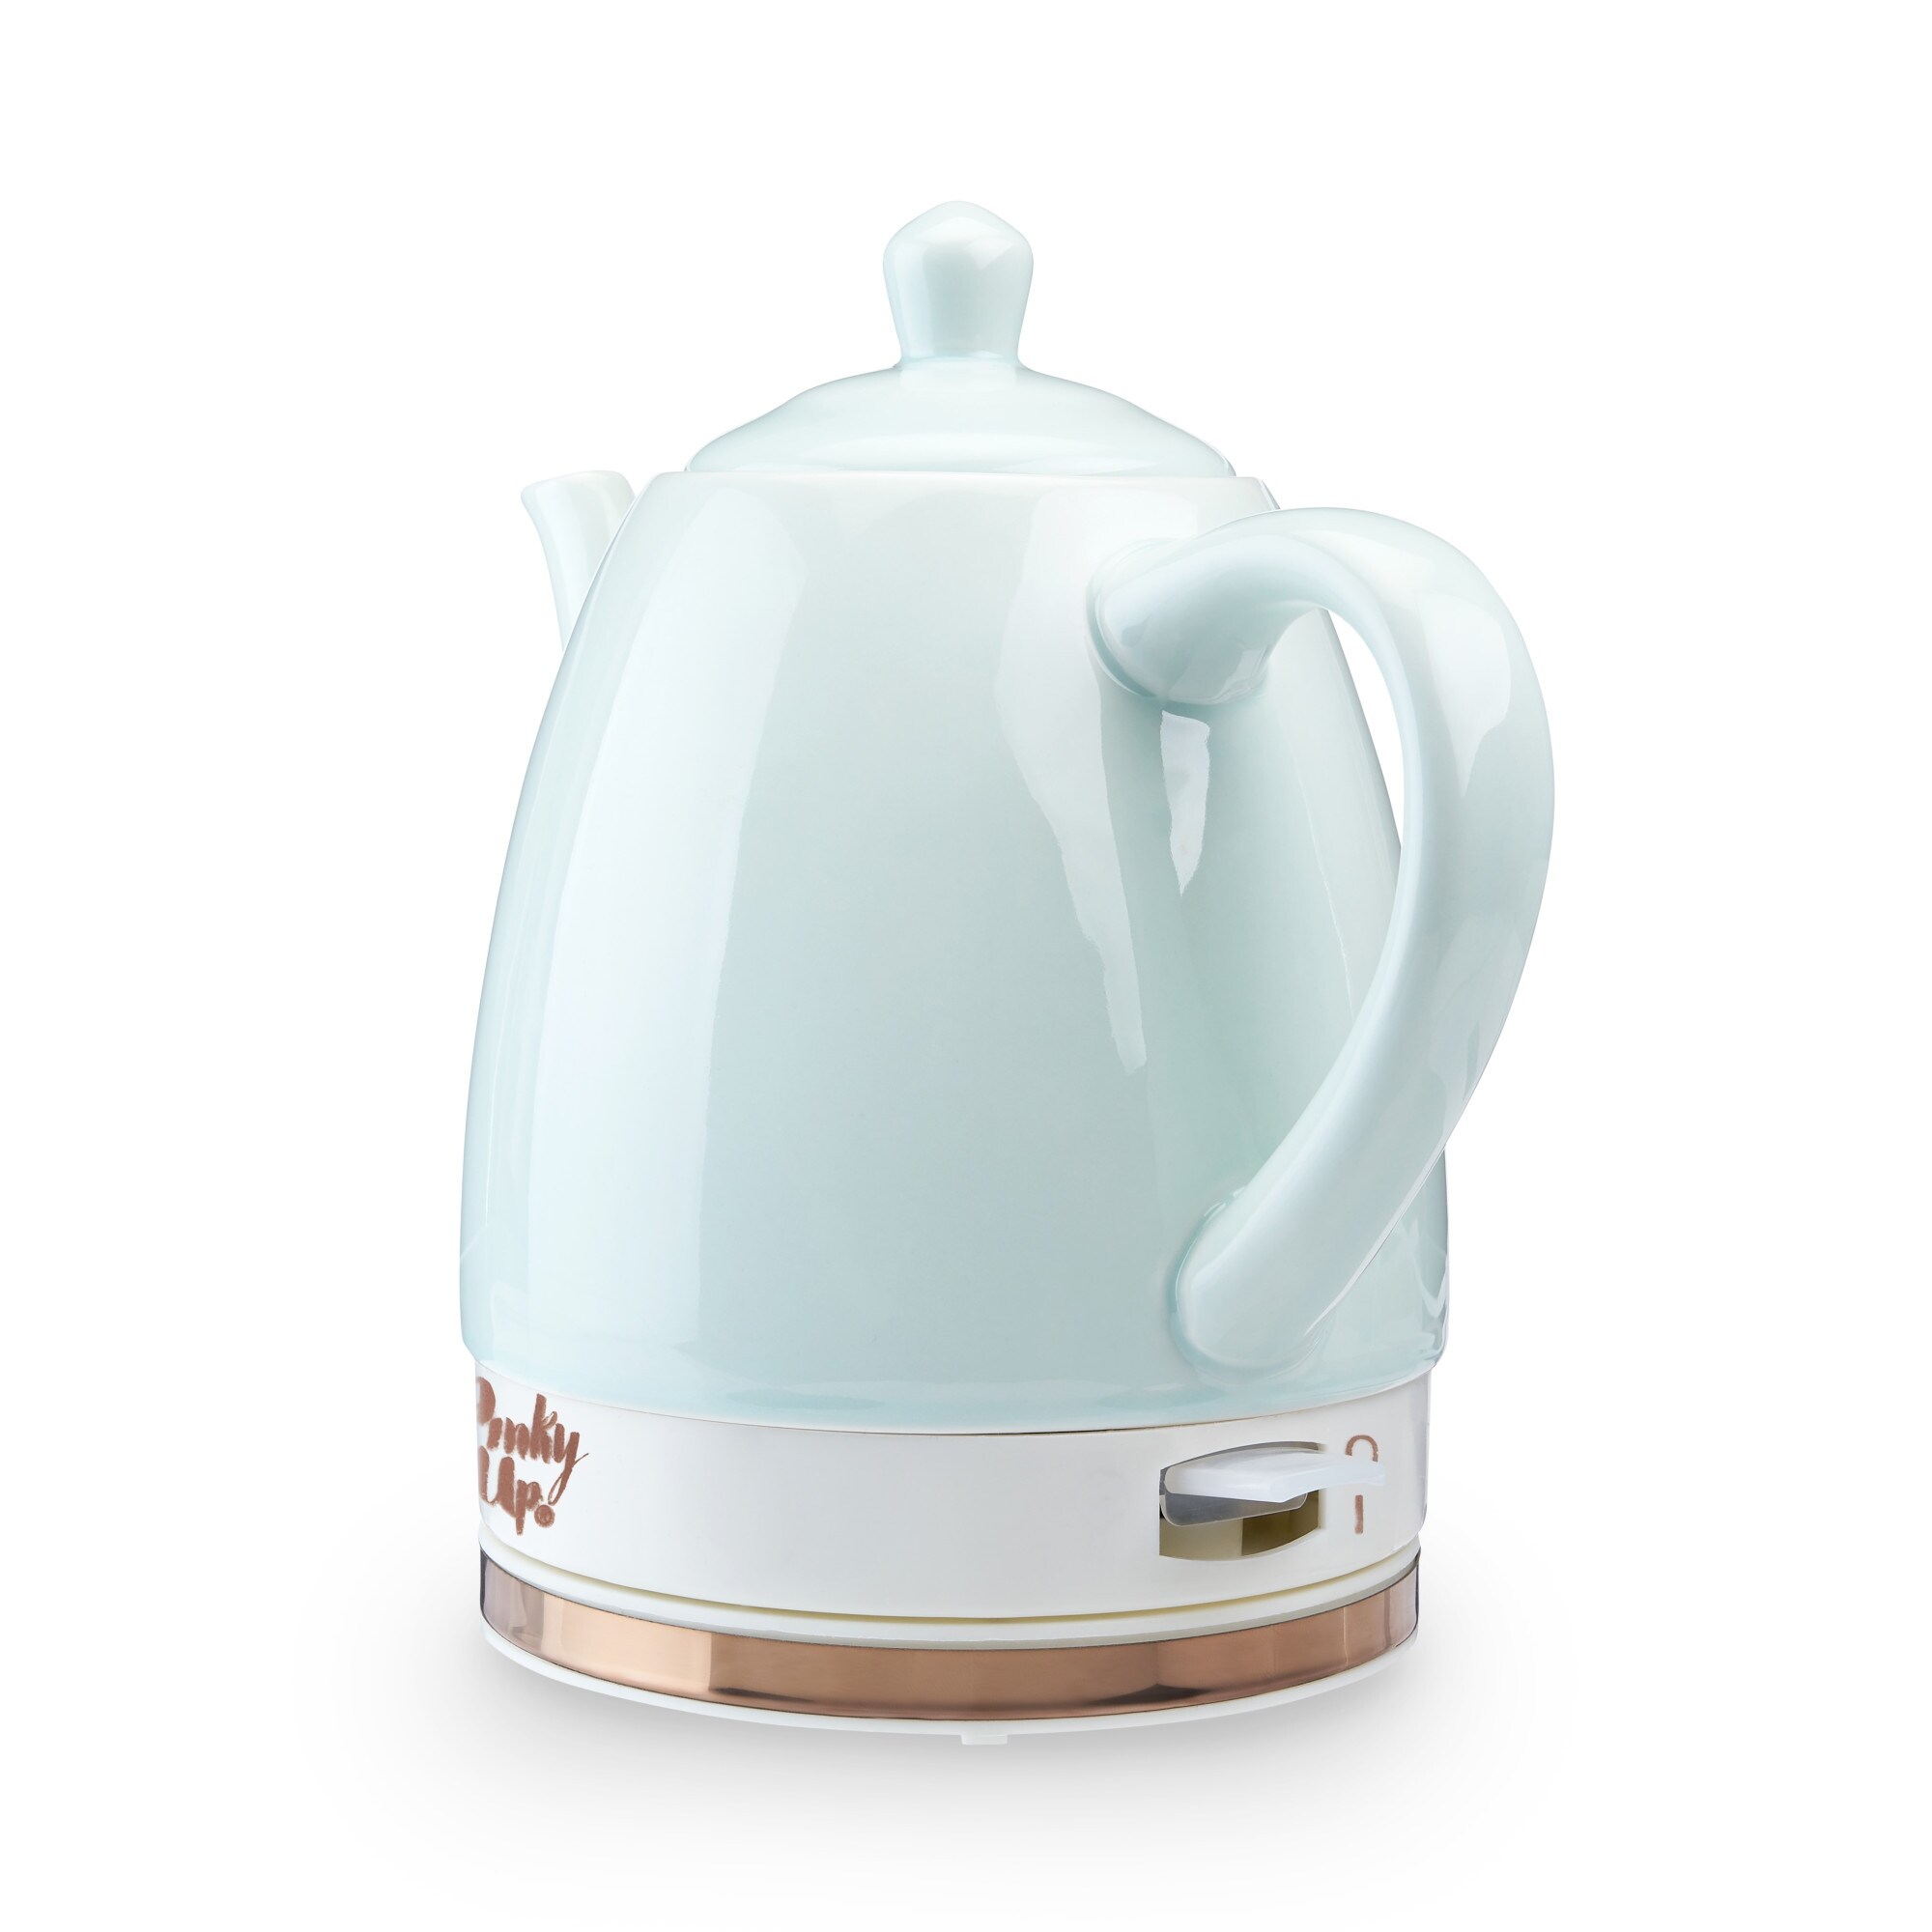 https://ak1.ostkcdn.com/images/products/is/images/direct/e3819b878502ac65252cf48e8453a248ccb5c3bc/Noelle-Ceramic-Electric-Tea-Kettle-by-Pinky-Up.jpg